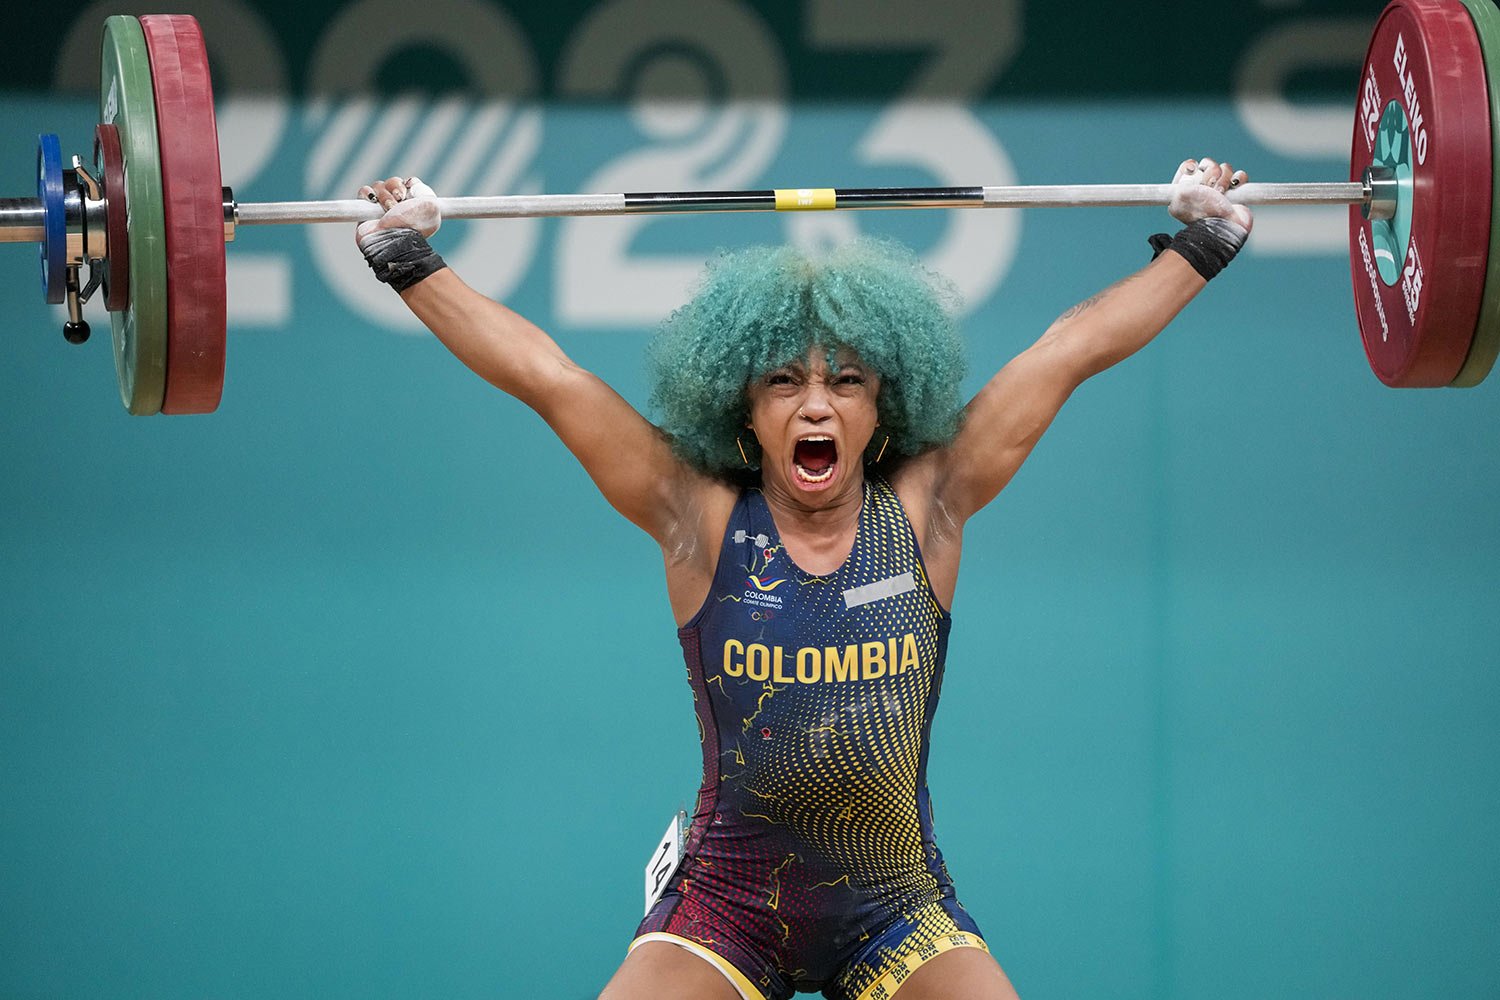  Colombia's Concepcion Usuga competes in women's weightlifting 59Kg at the Pan American Games in Santiago, Chile, Oct. 22, 2023. (AP Photo/Moises Castillo) 